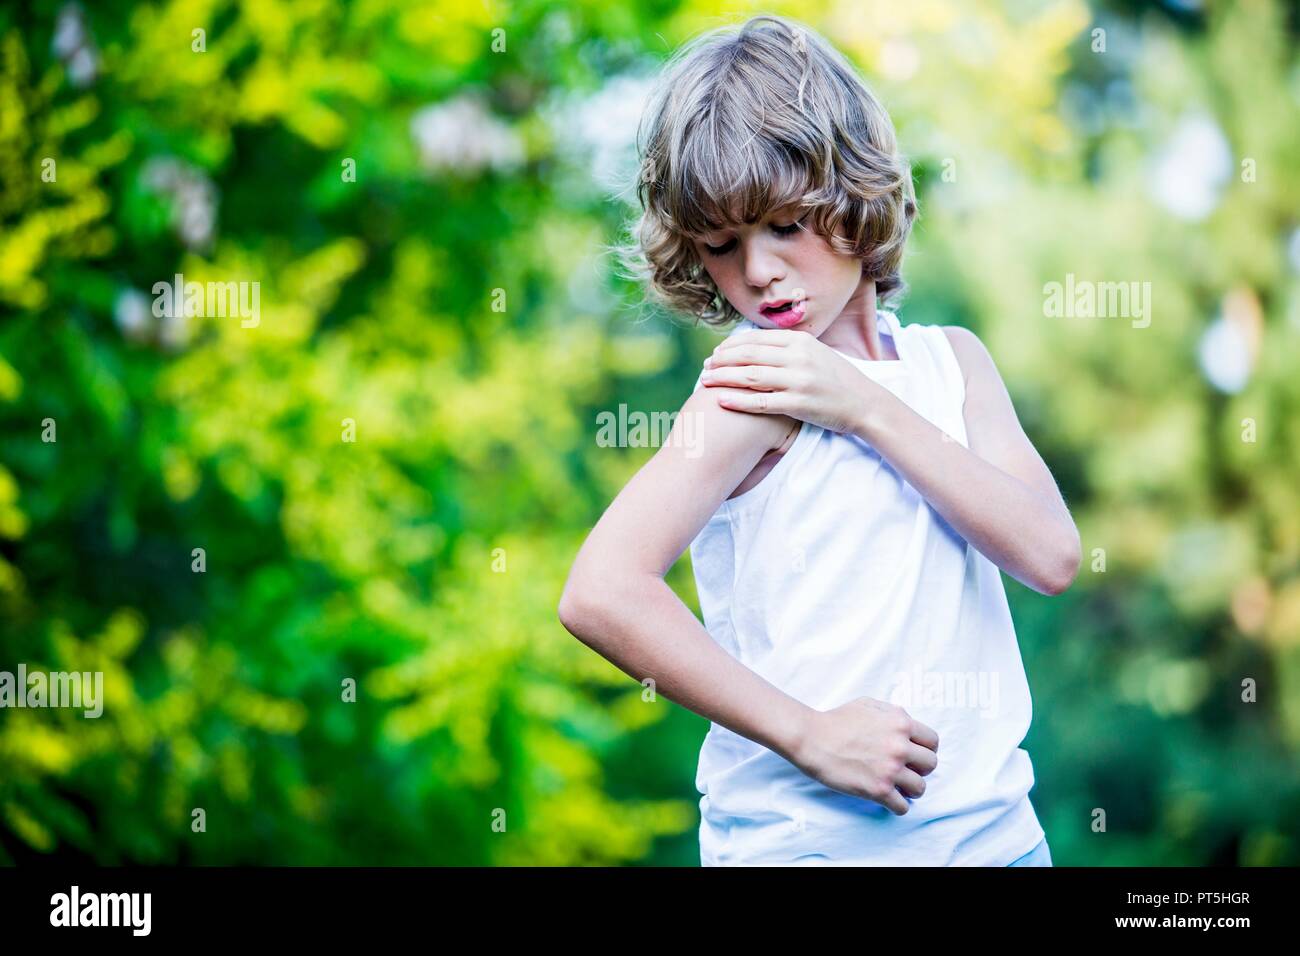 Young boy scratching arm. Stock Photo